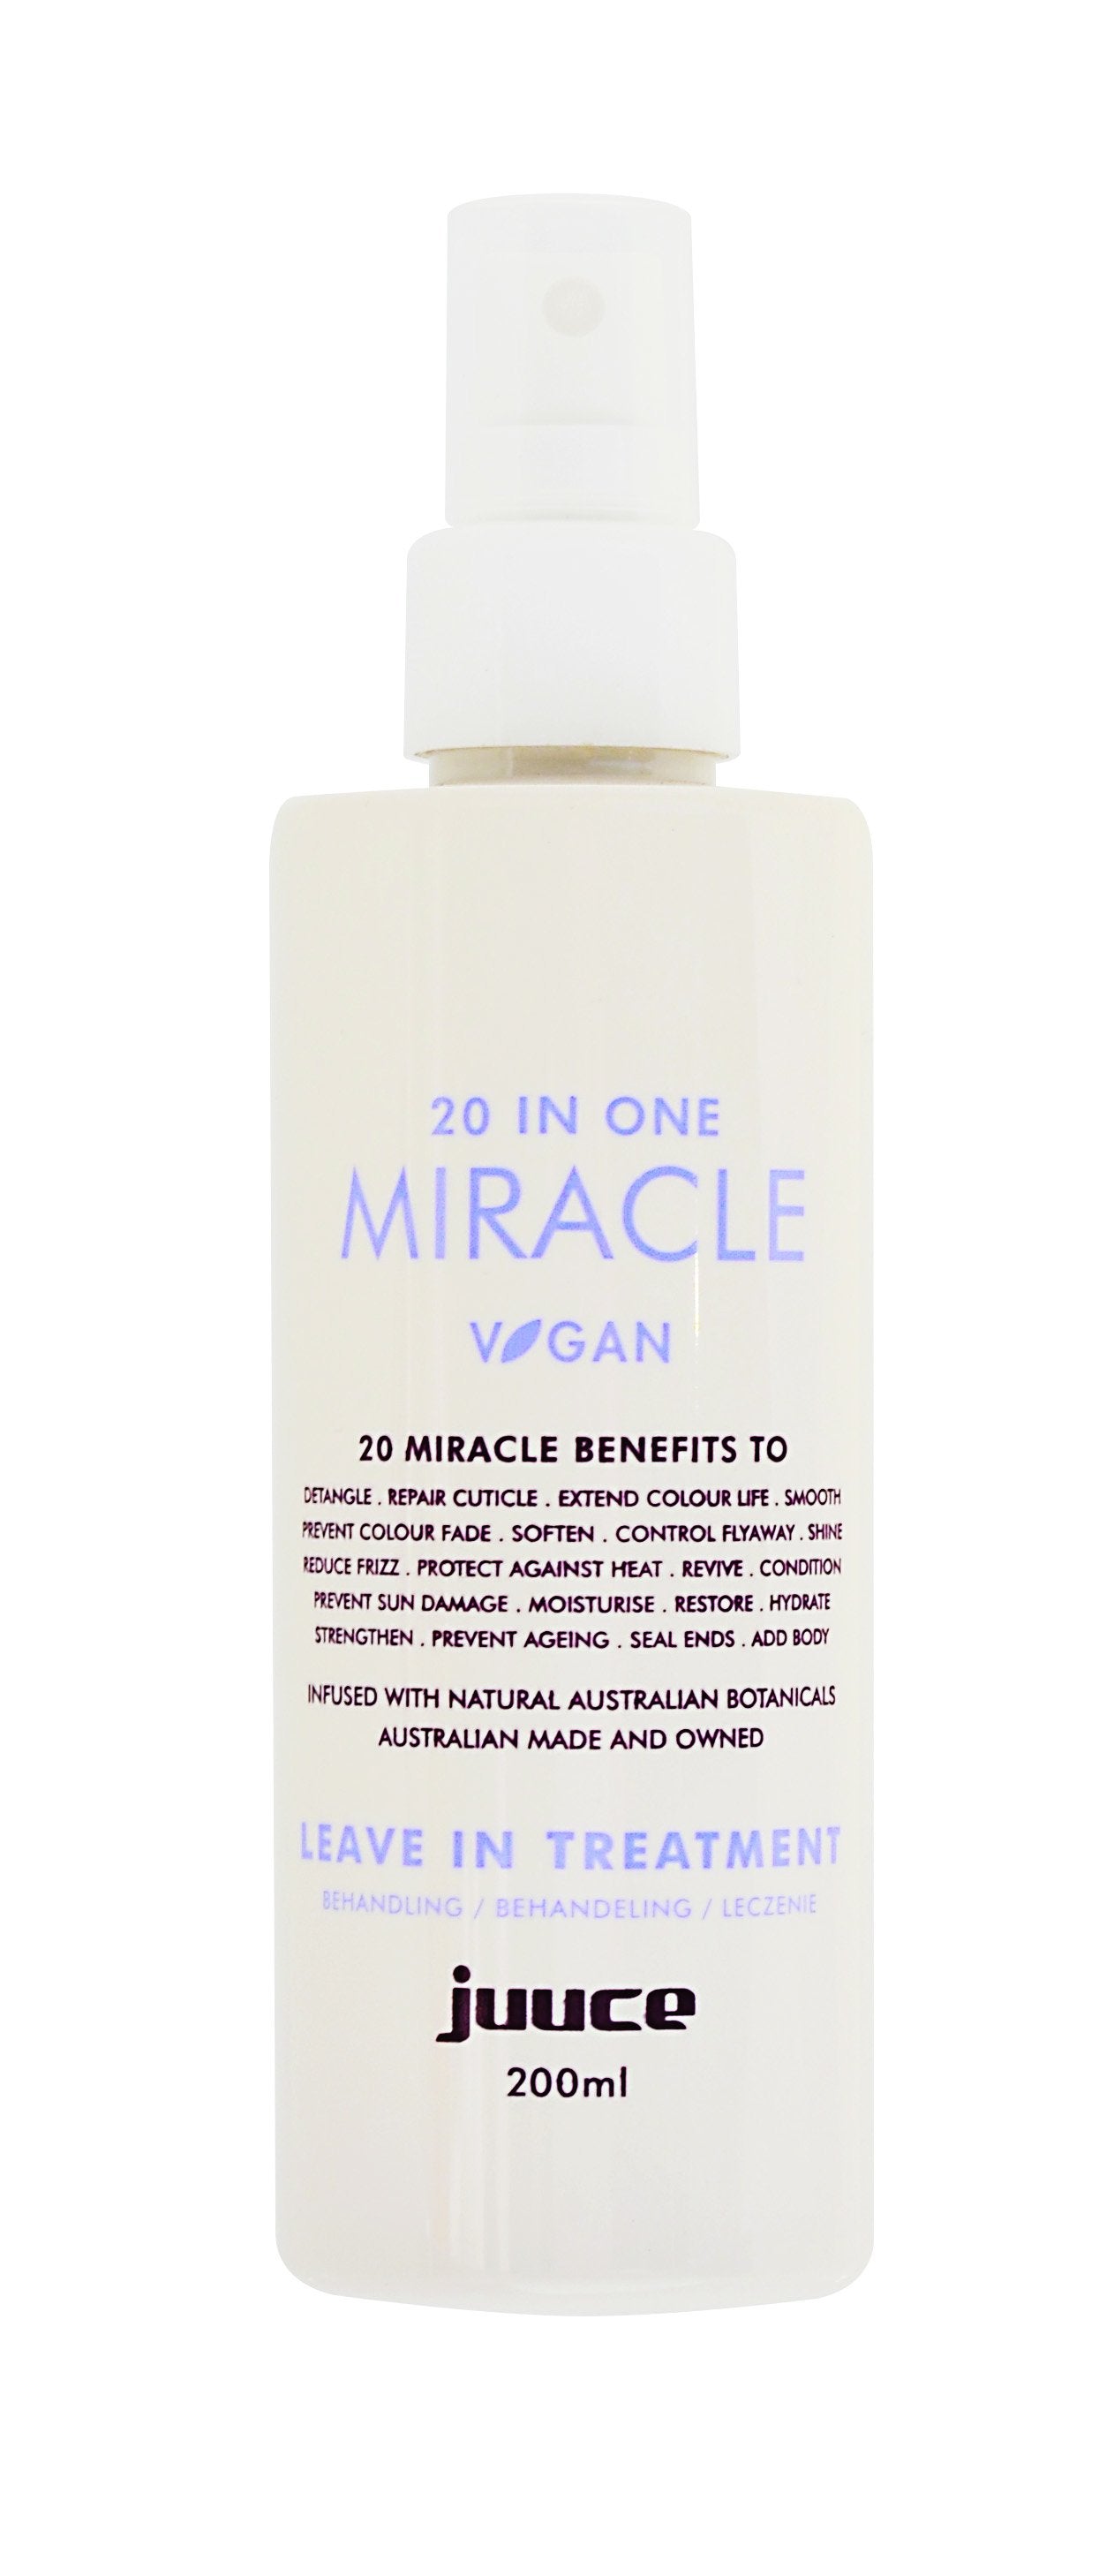 20 in one Miracle Spray 200ml